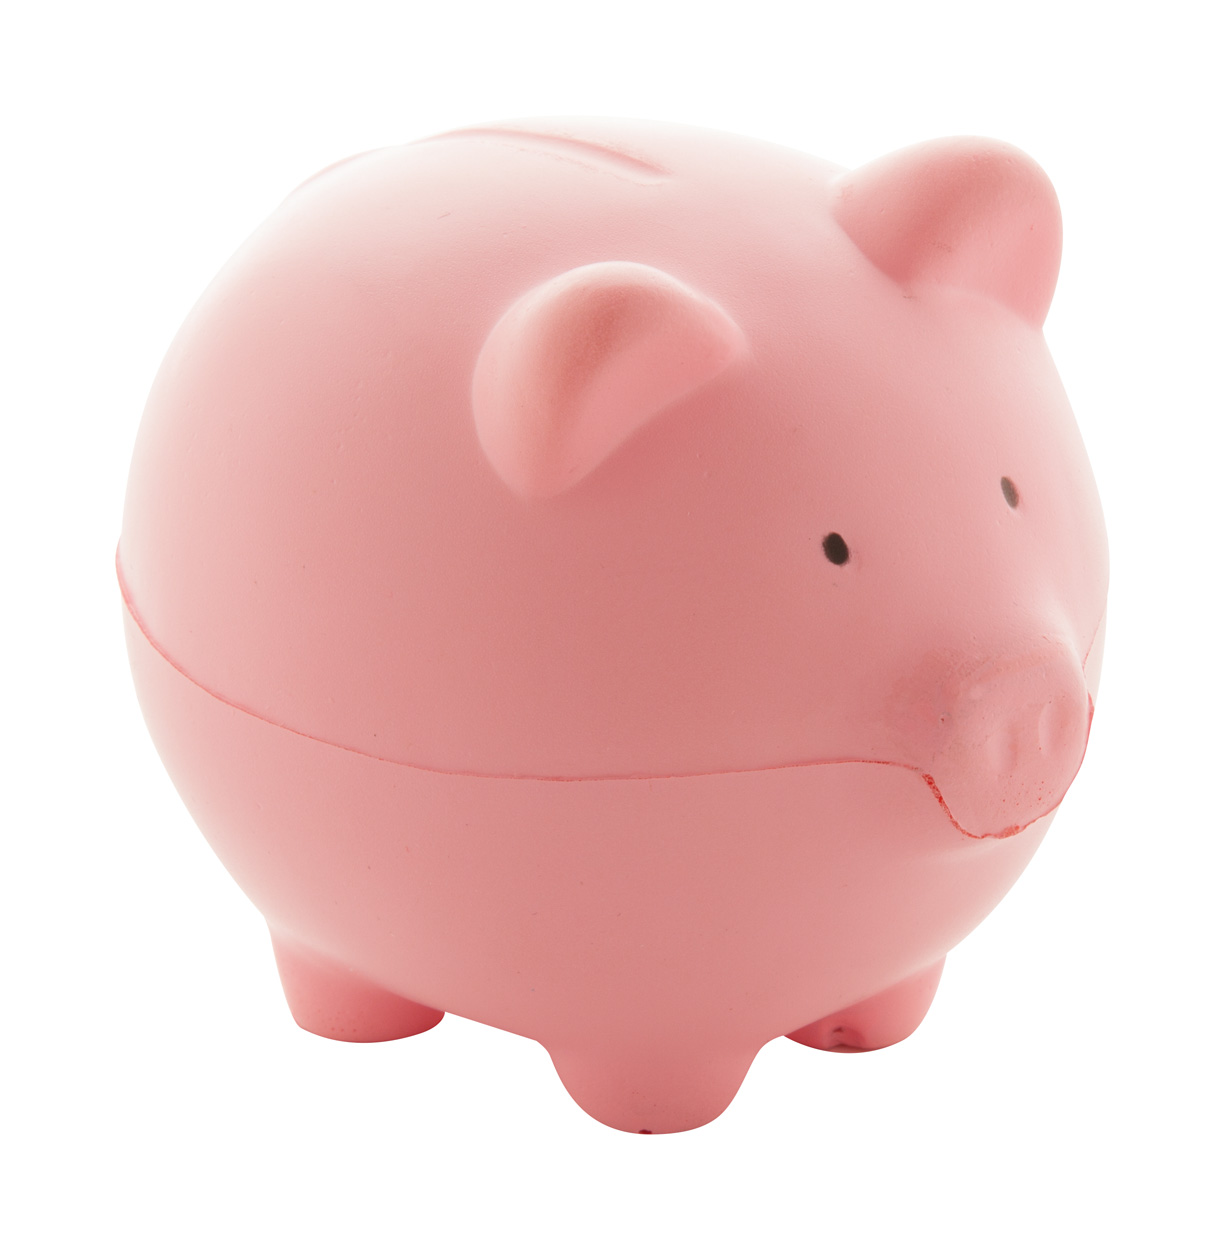 Anti-stress gadget OINK in the shape of a piggy bank - pink